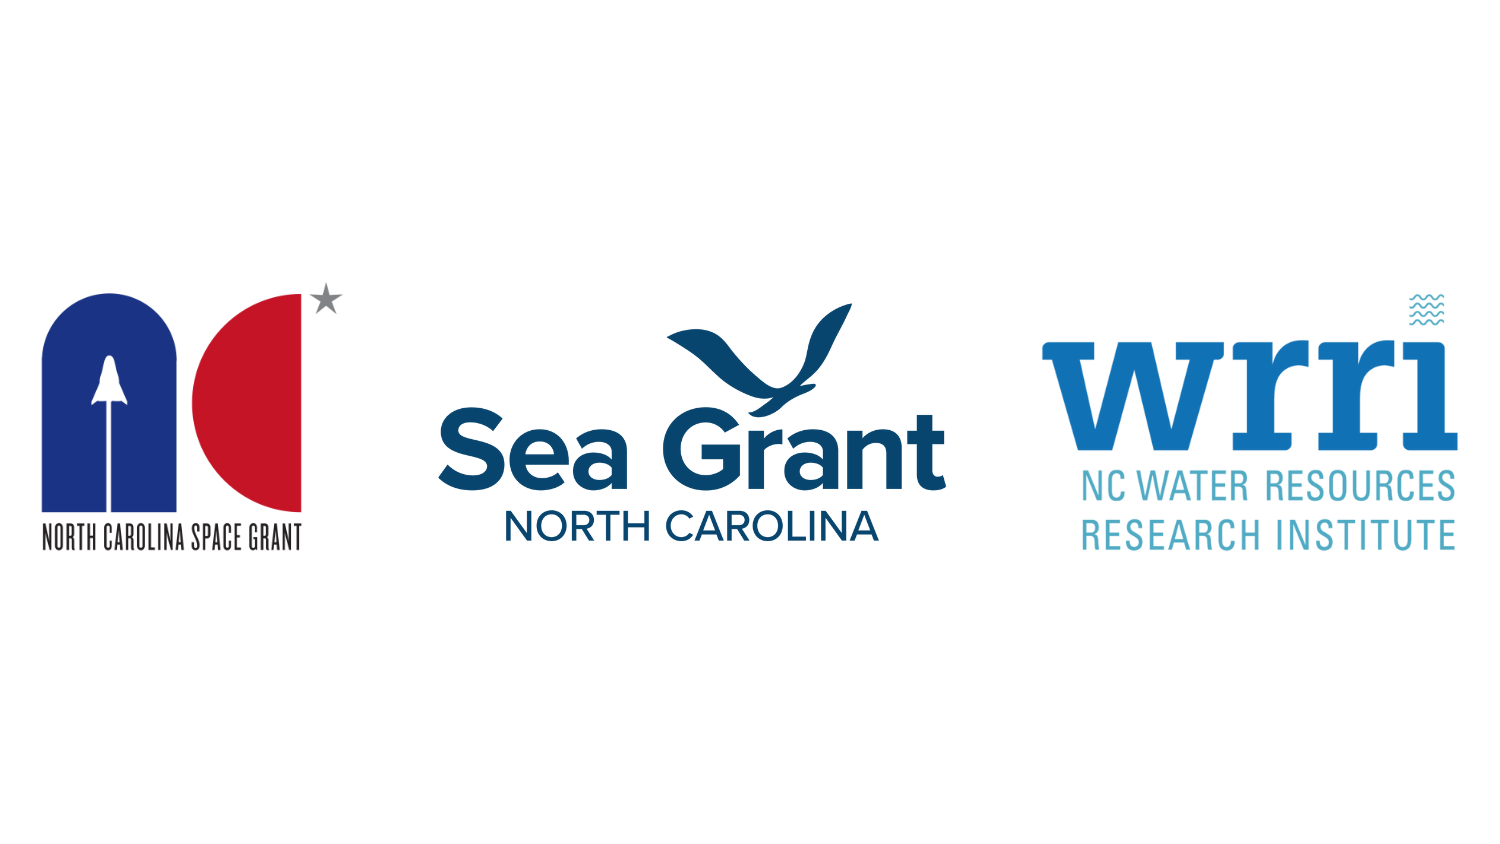 A white banner image featuring the logos for NC Space Grant, NC Sea Grant, and WRRI